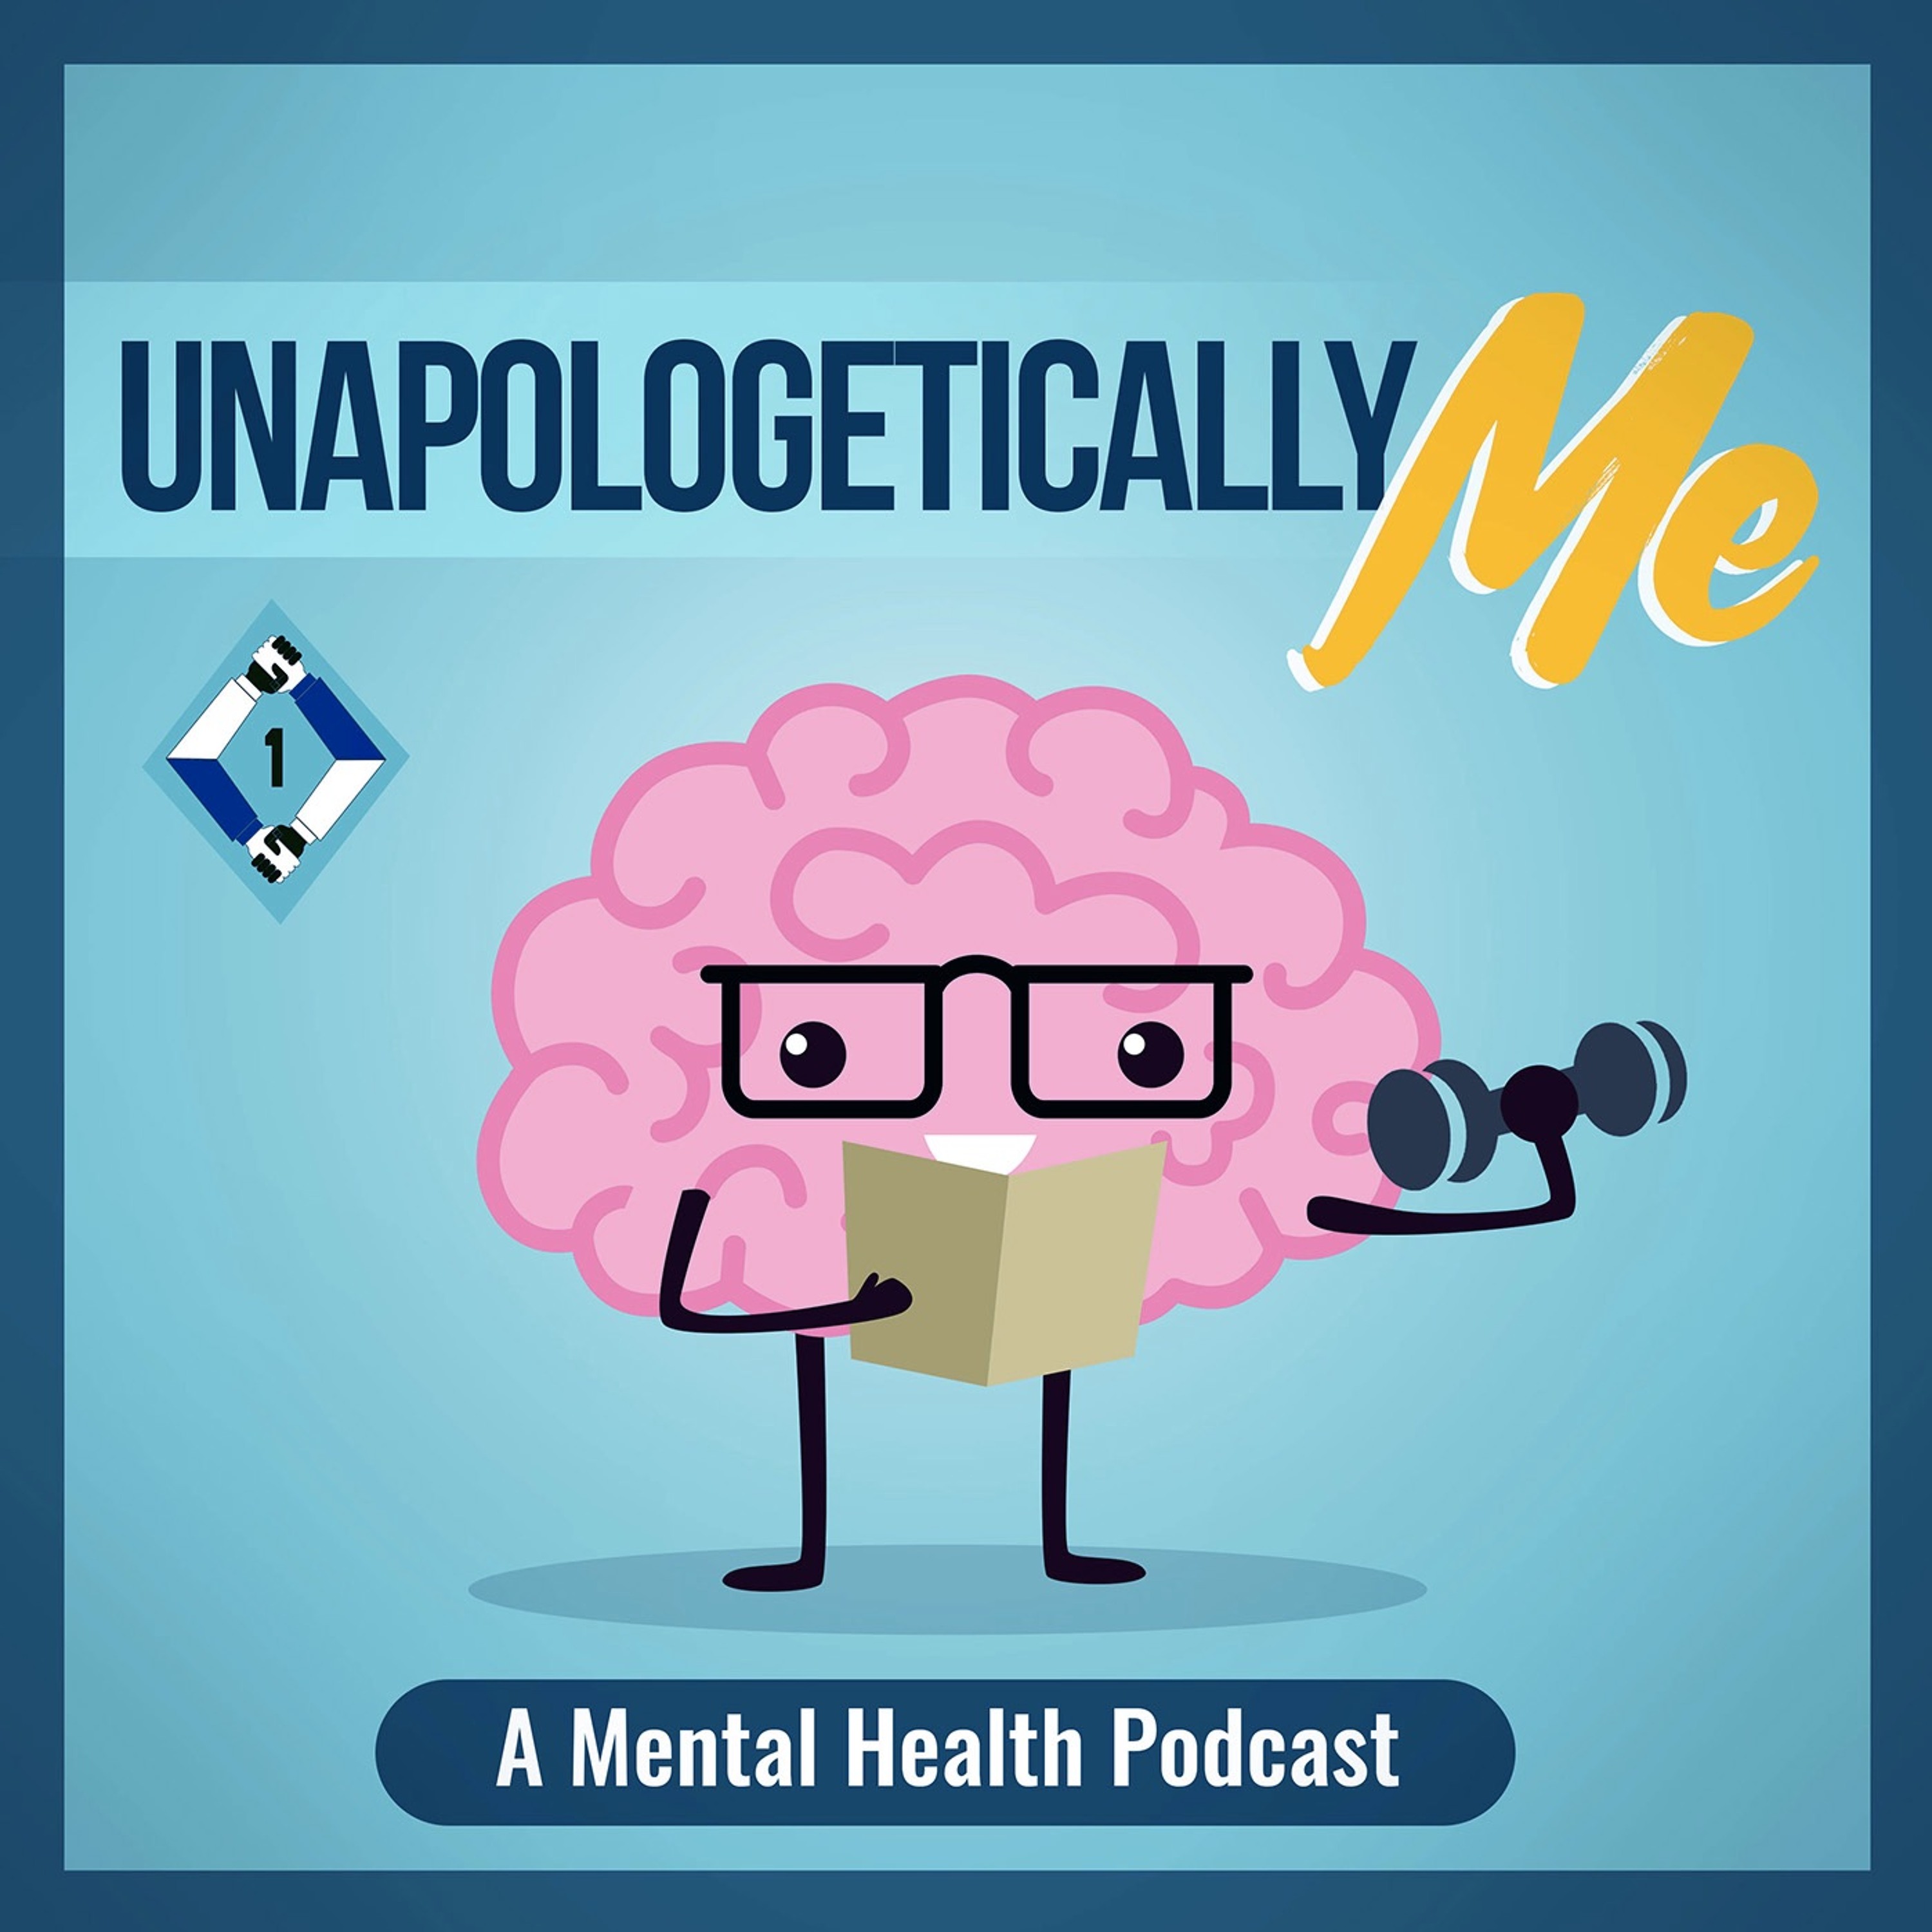 Unapologetically Me: A Mental Health Podcast - Getting Through A Financial Crisis With Karena Calhoun